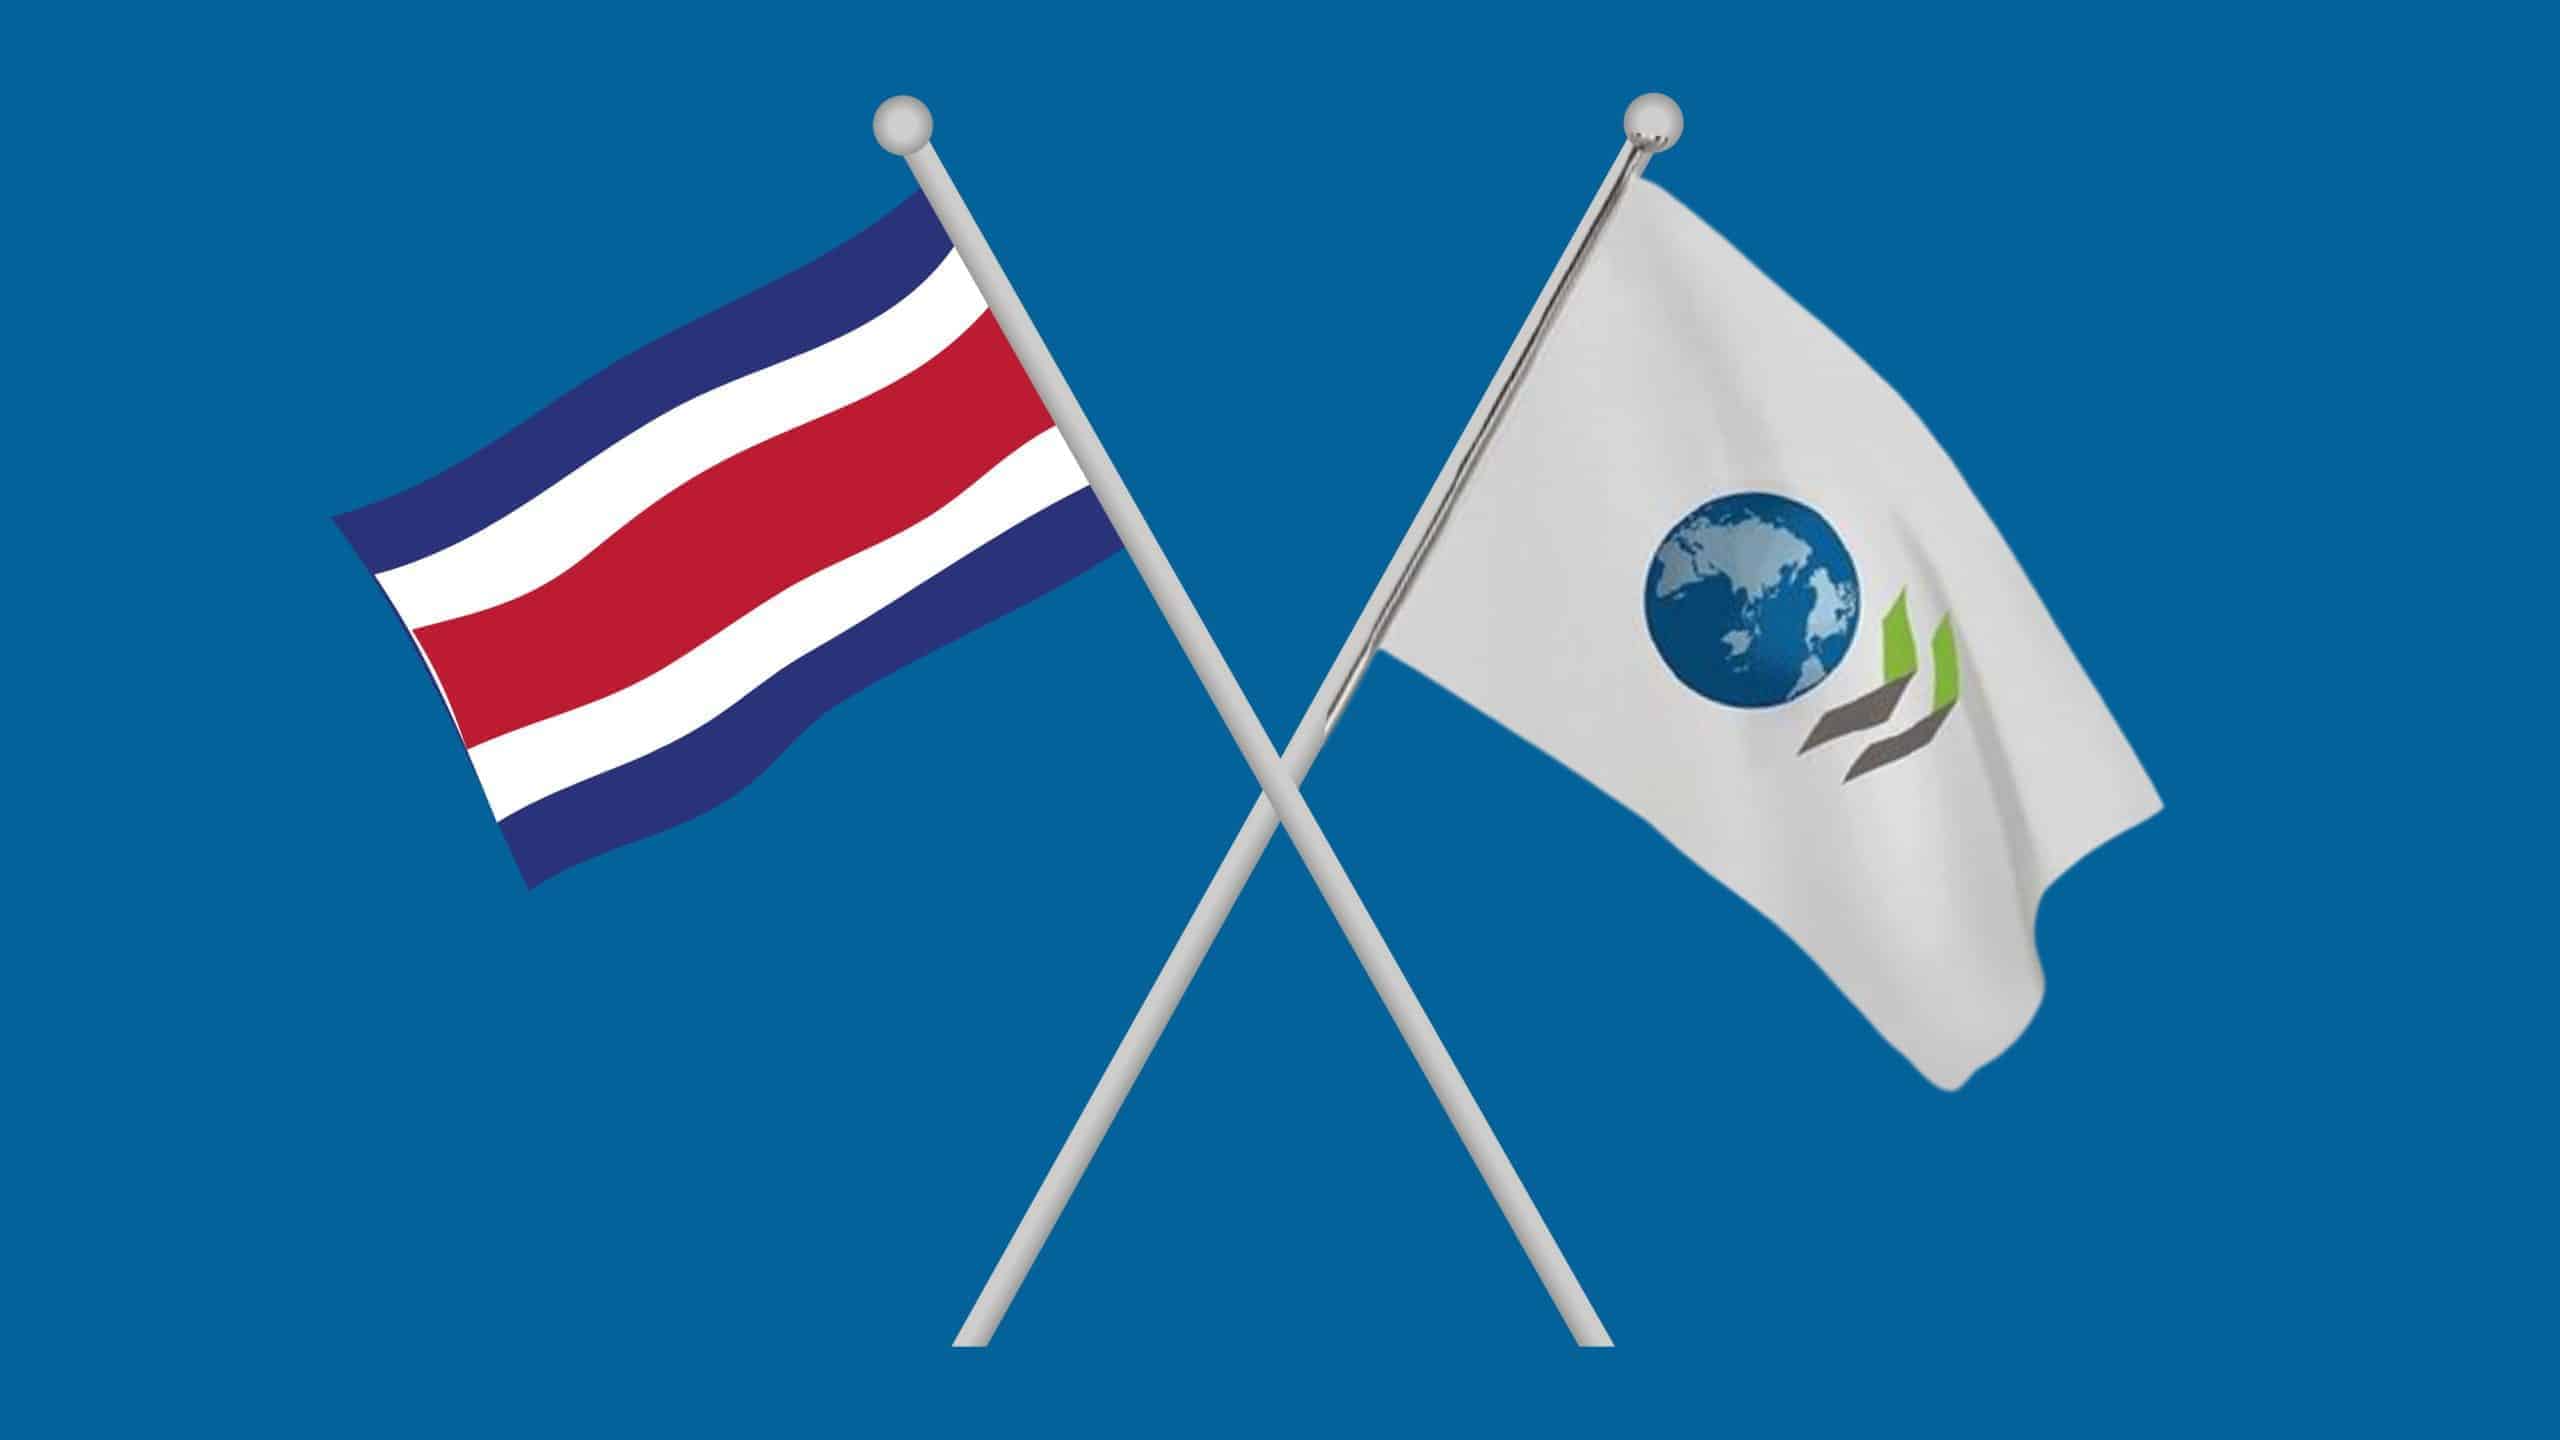 Costa Rica officially joined the OECD on May 25, 2021.